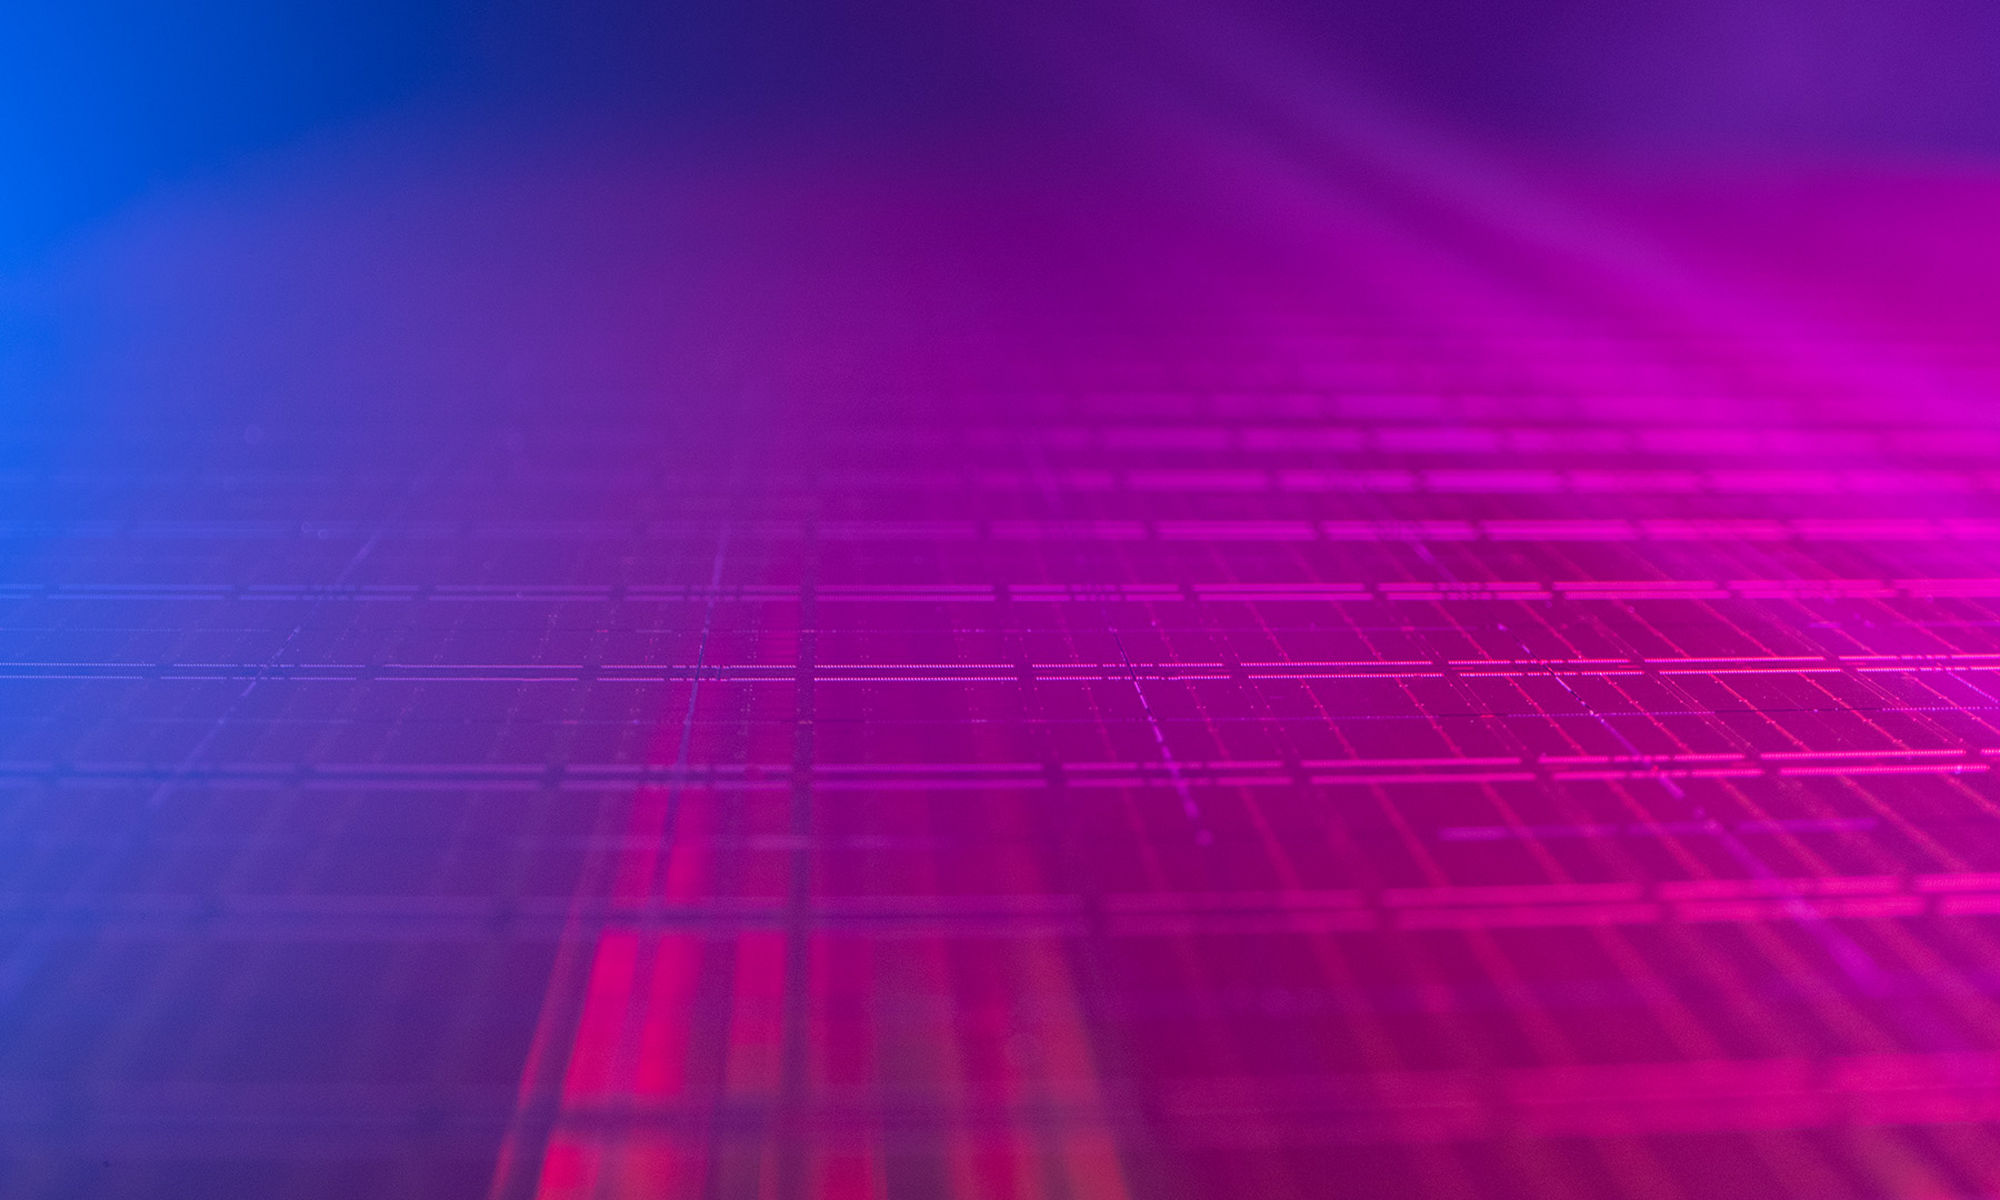 Abstract image of wafer in pink and blue